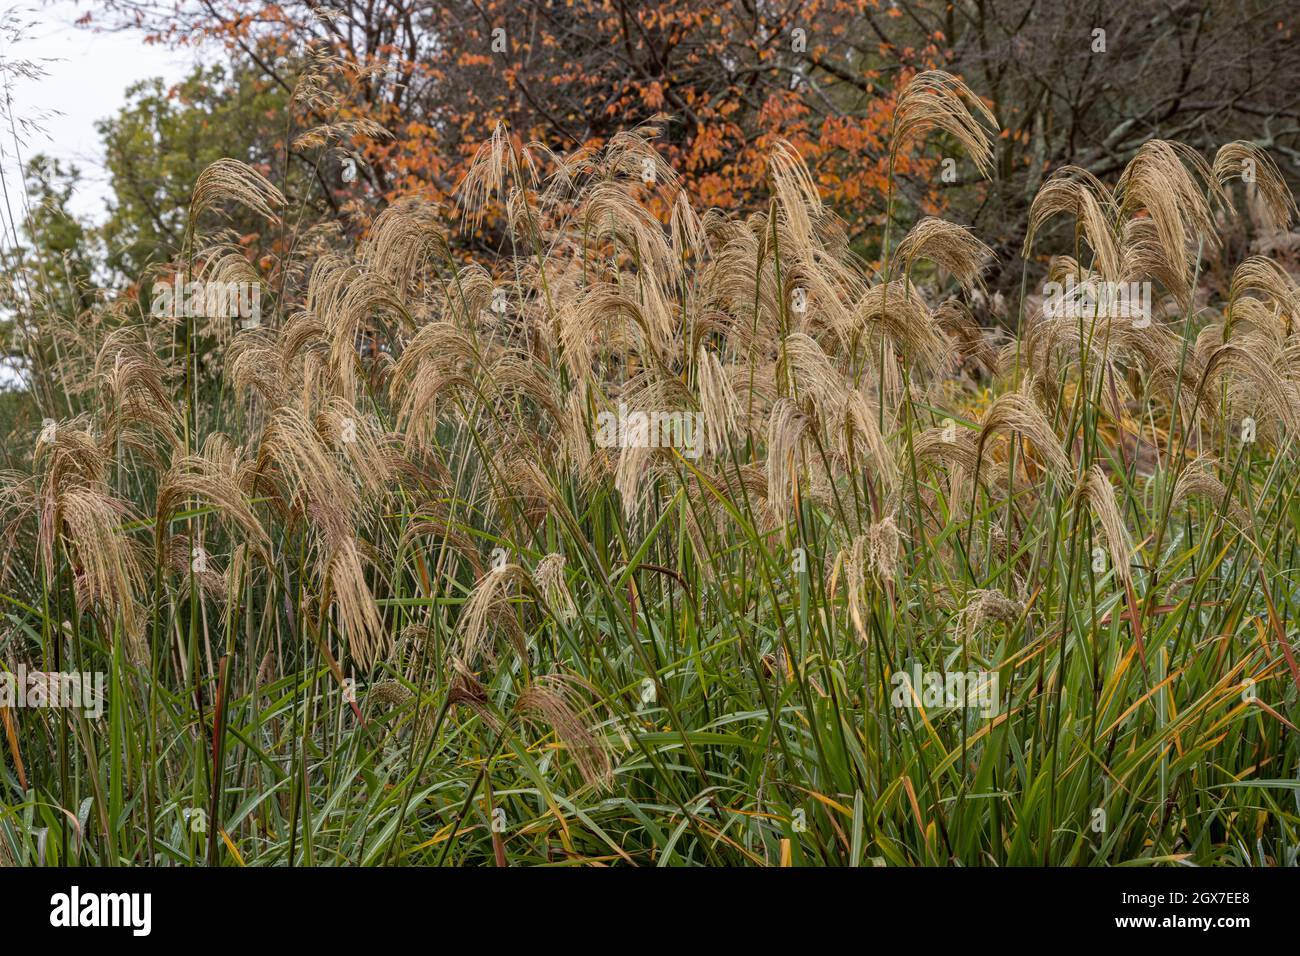 Miscanthus nepalensis in fiore in autunno Foto Stock